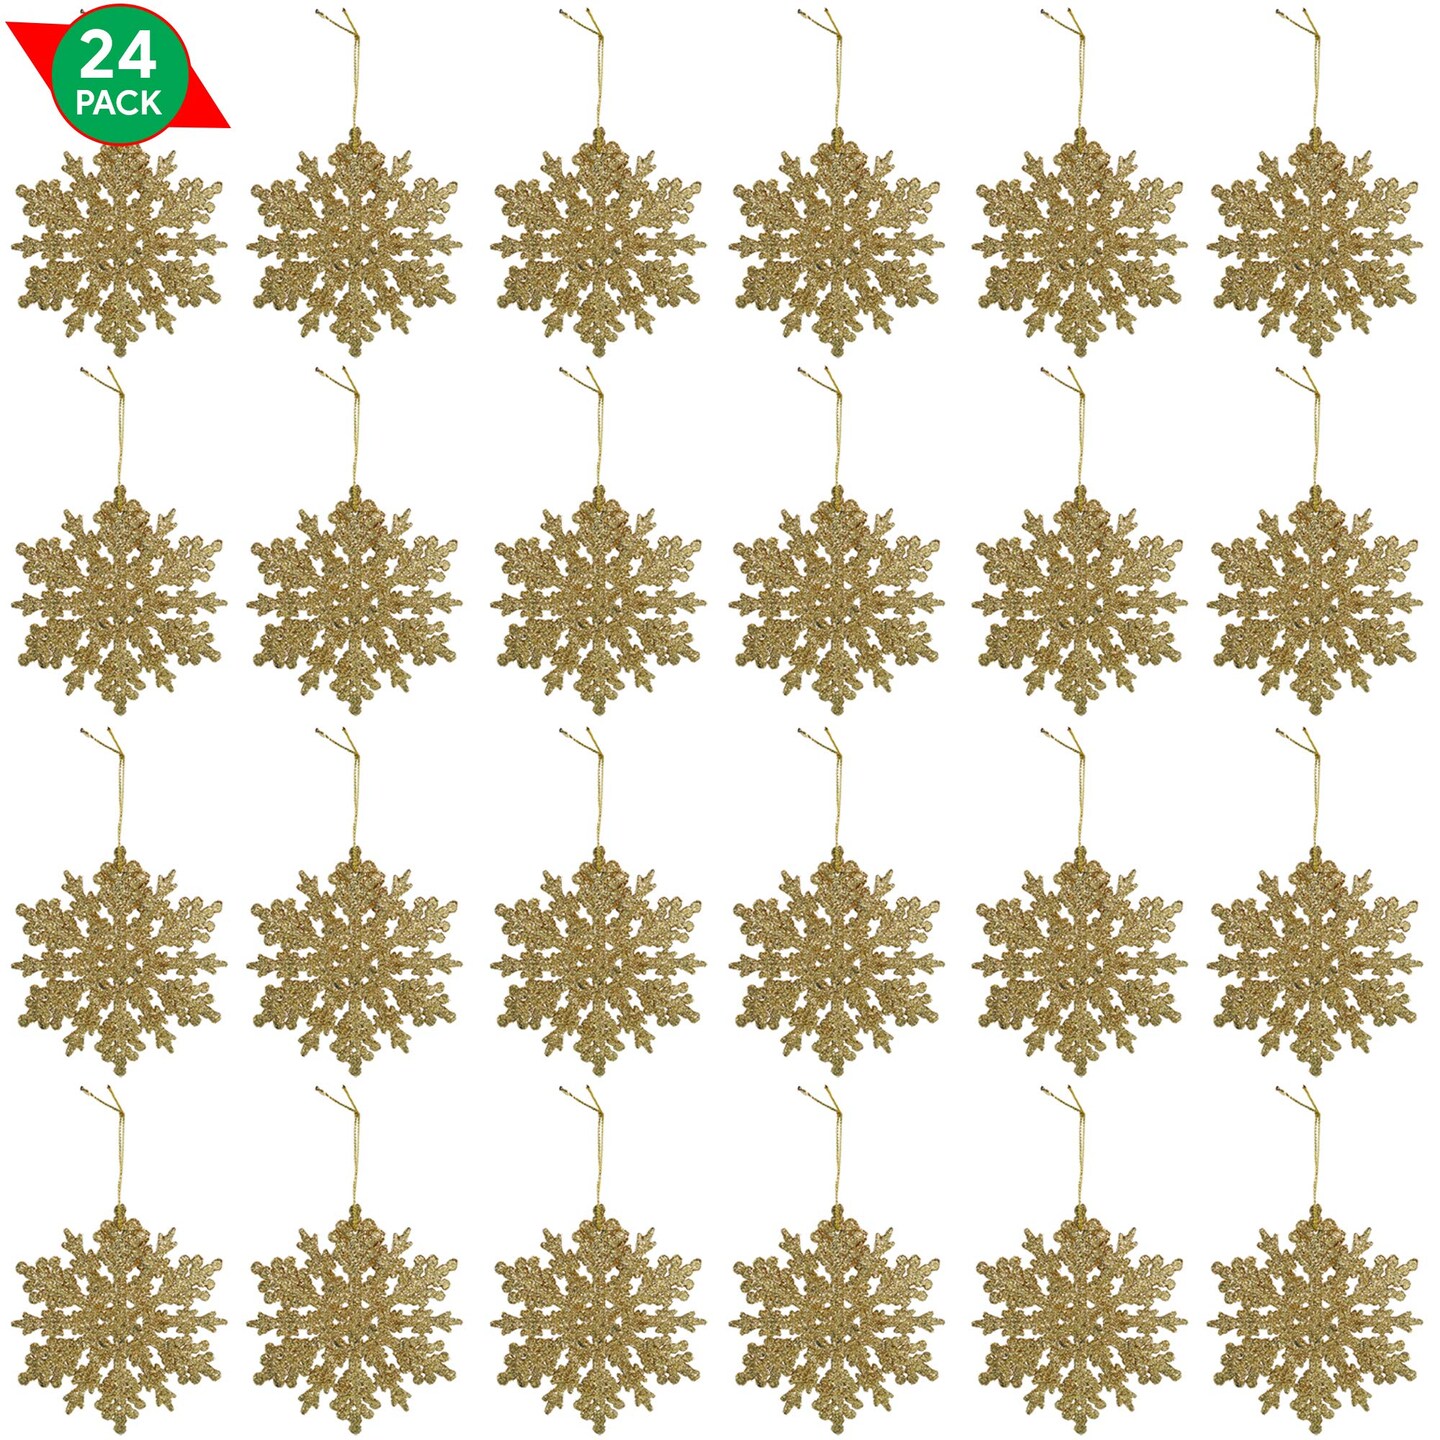 Ornativity Glitter Snowflake Ornaments - Holiday Wedding Plastic Sparkling Hanging Snowflakes Pack of 24